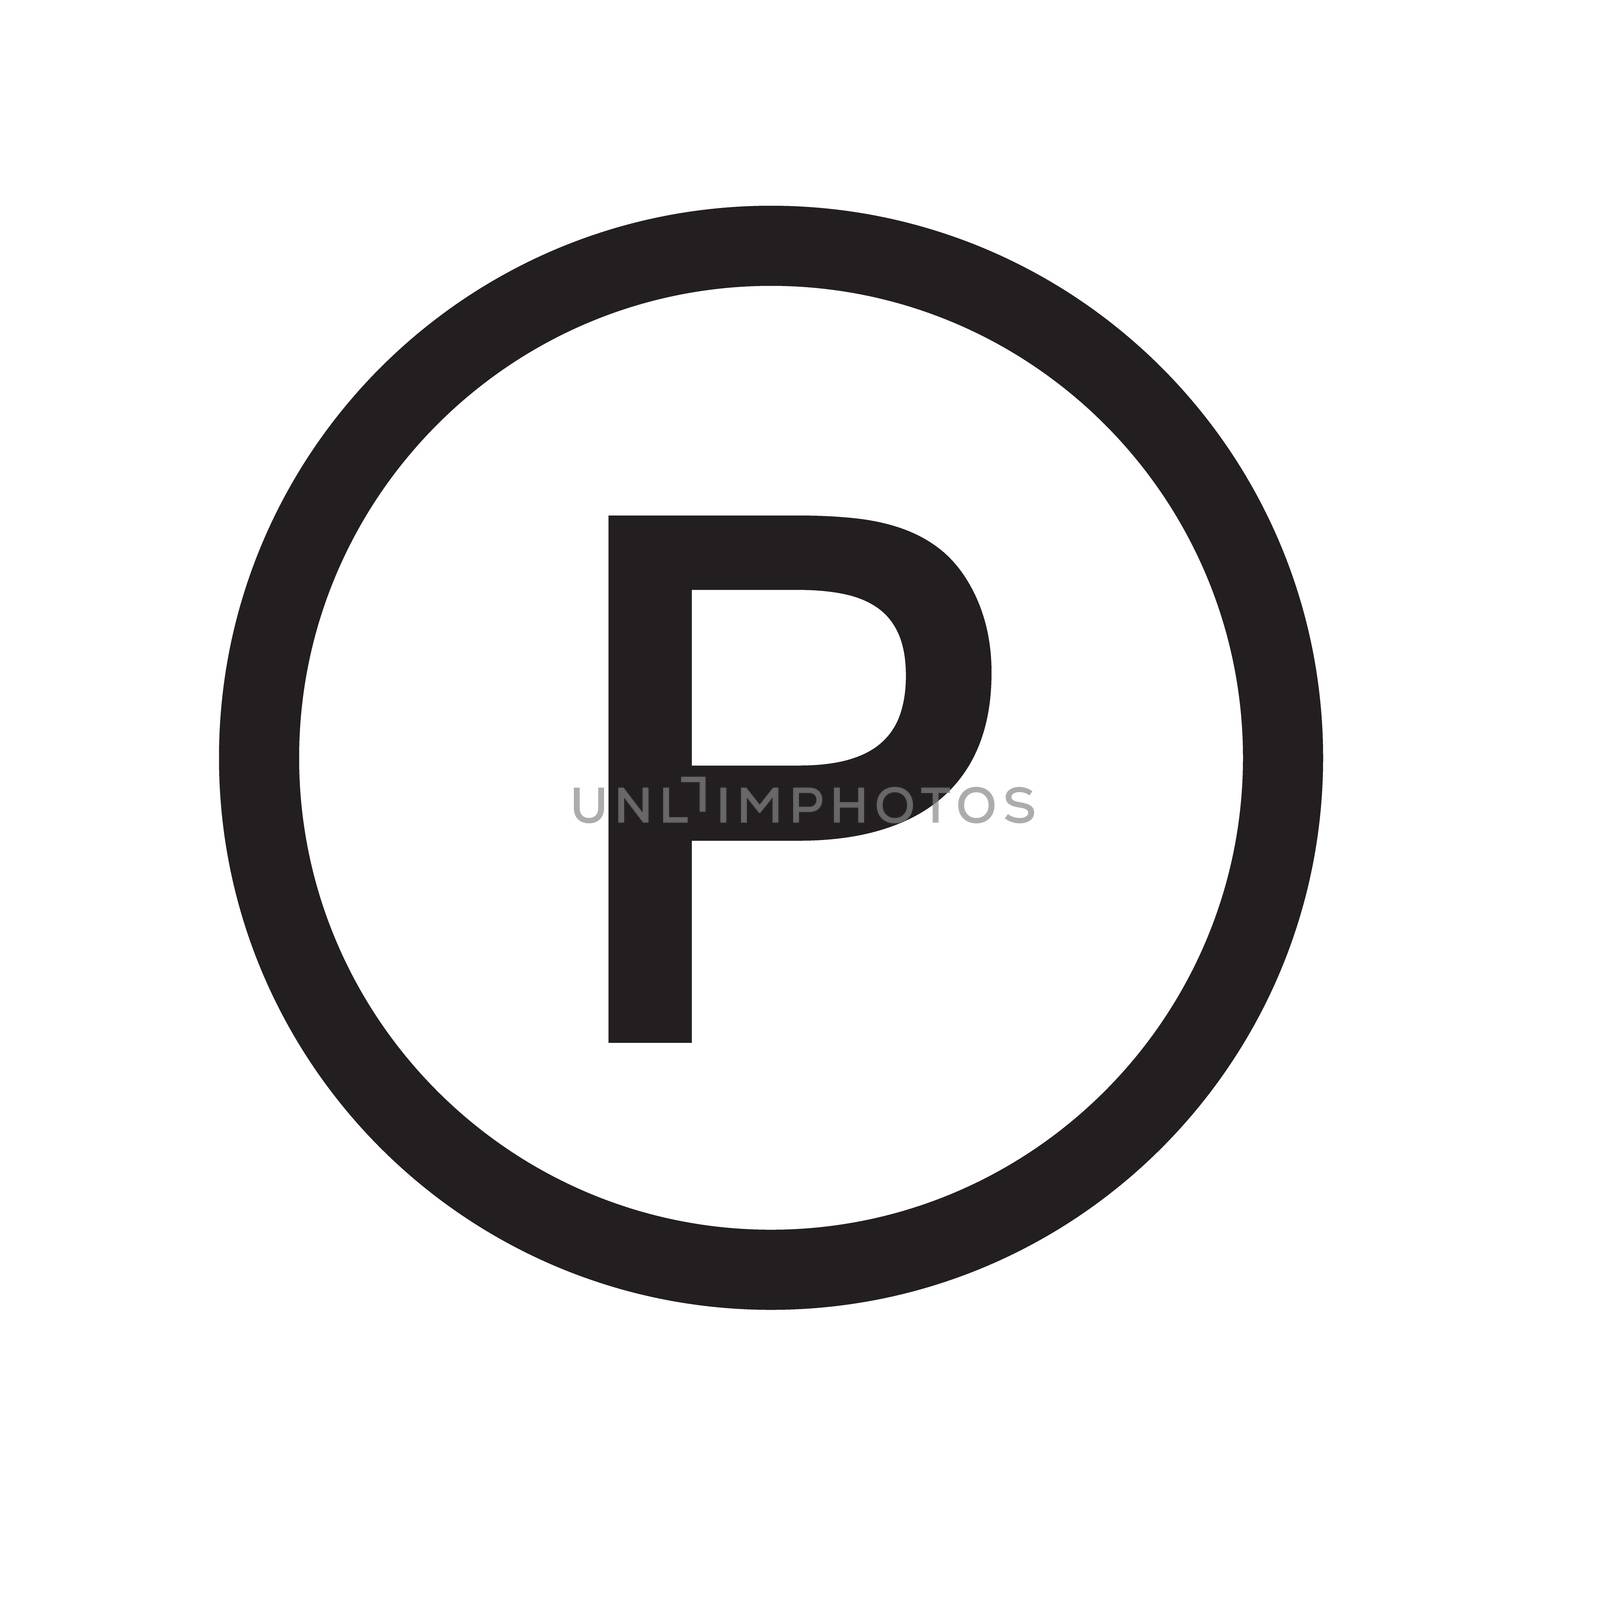 no parking icon on white background. flat style. sign prohibitin by suthee